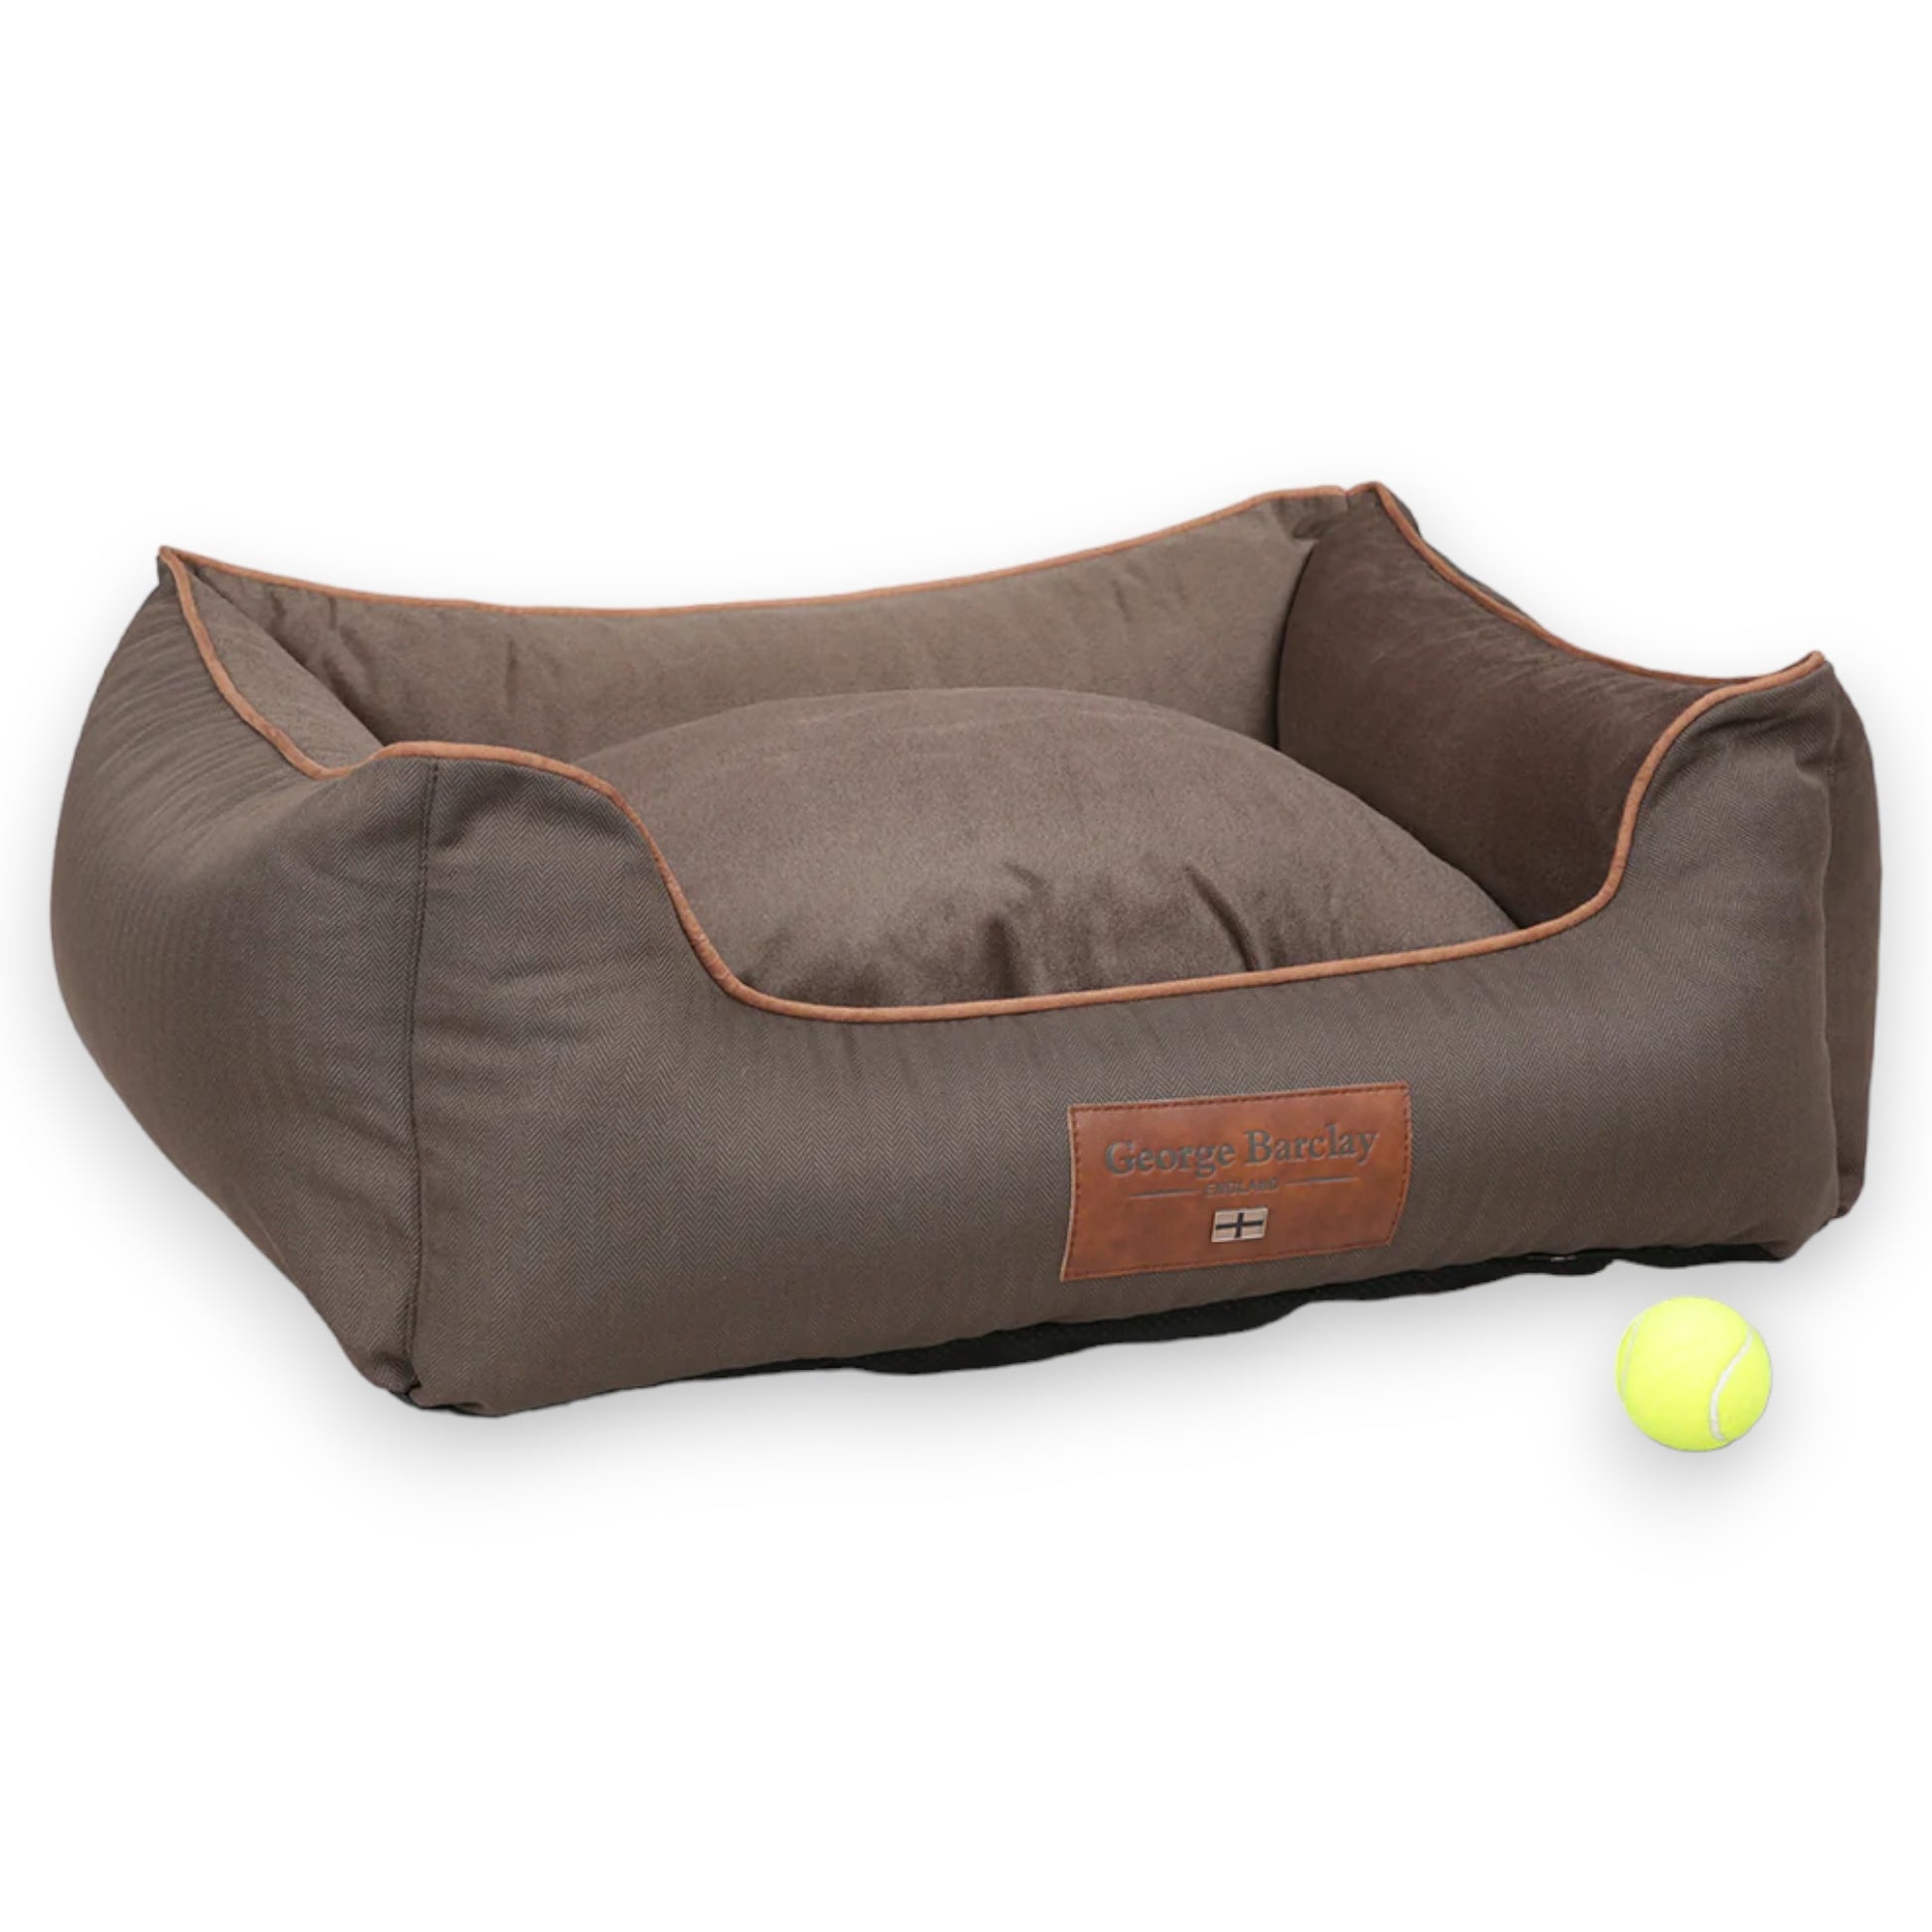 George Barclay Savile Orthopaedic Box Bed - Tanner's Brown Dog Bed